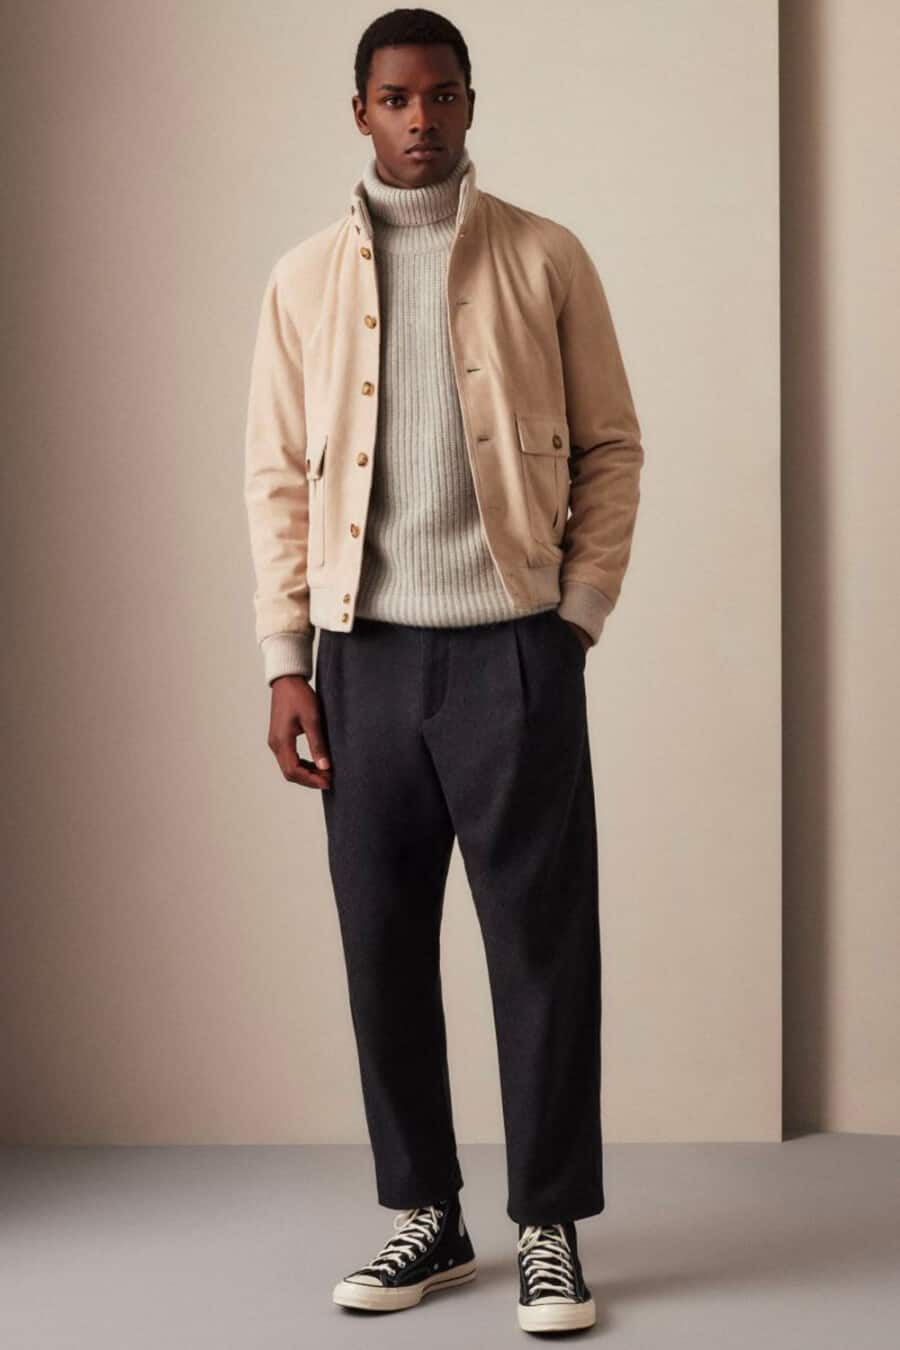 Men's cropped black pants, ribbed grey roll neck jumper, camel wool bomber jacket and black Converse high-top sneakers outfit